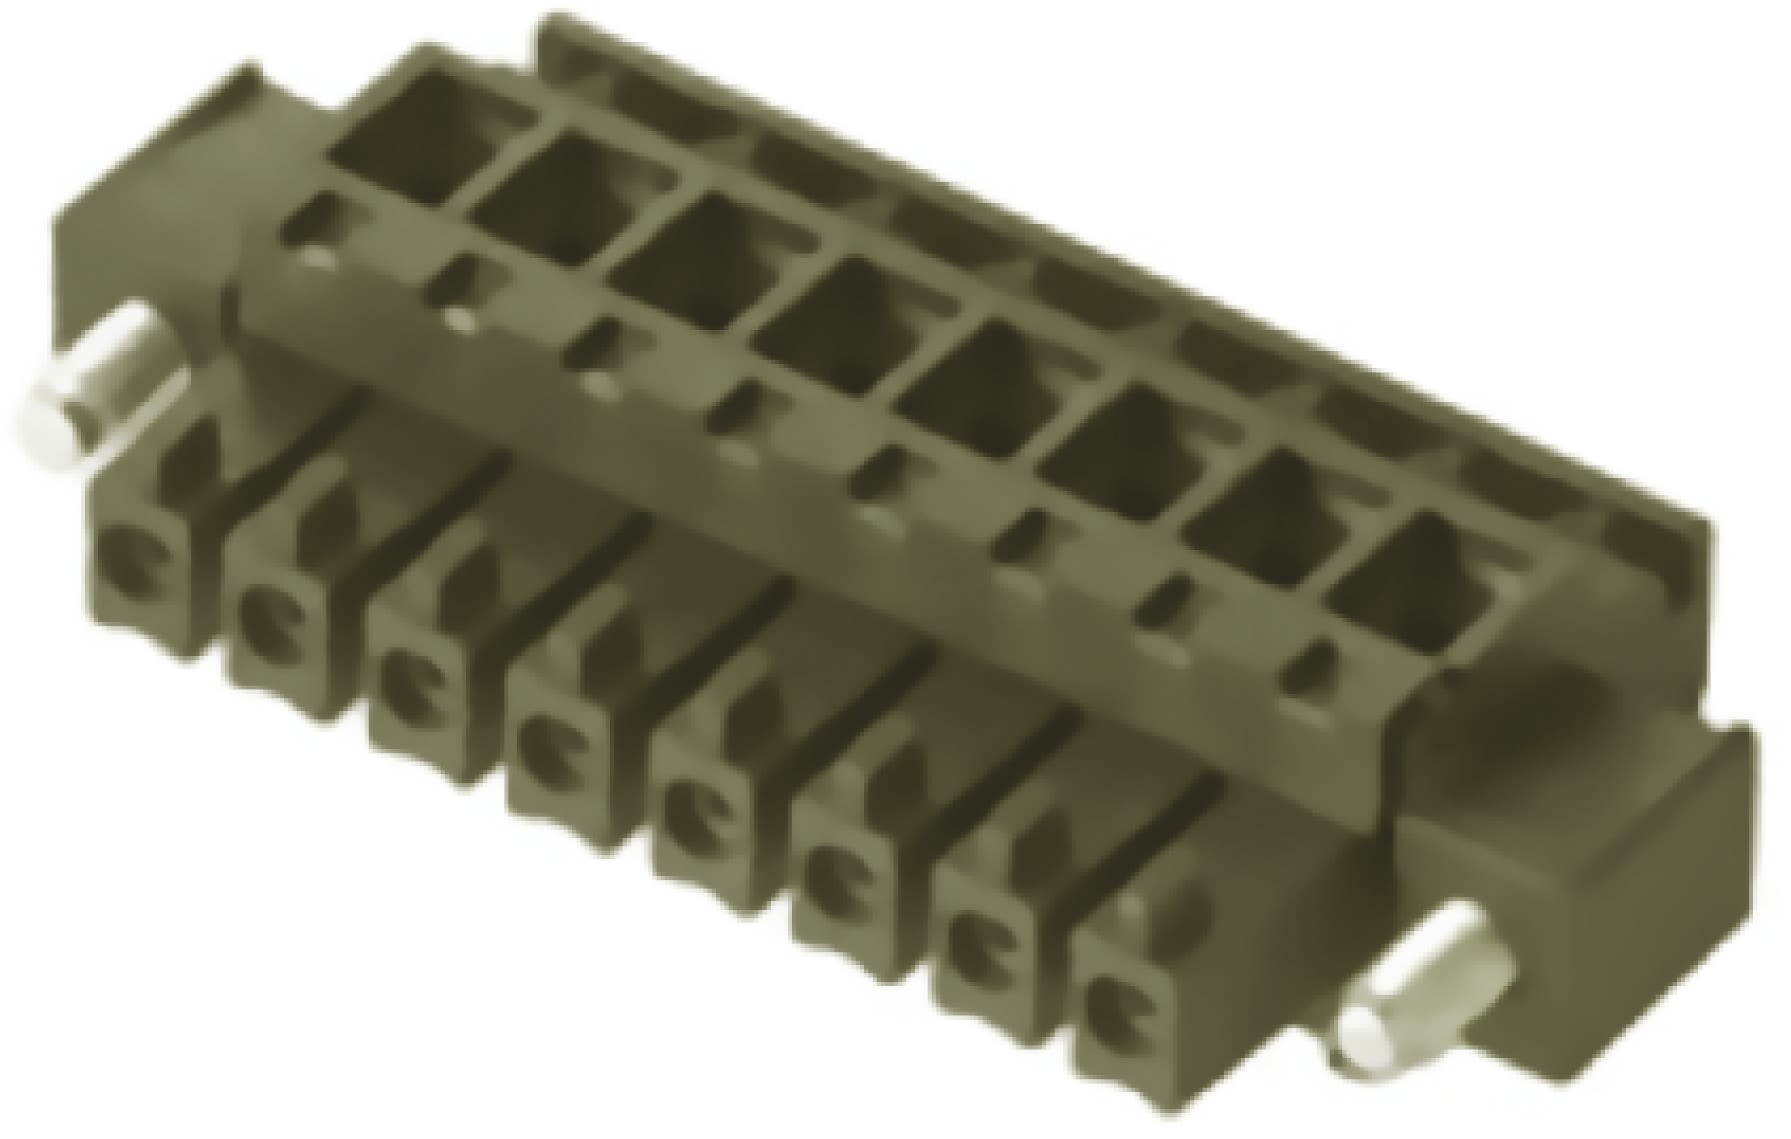 Weidmüller BC 3.81 2-pin Pluggable Terminal Block, 3.81mm Pitch Rows